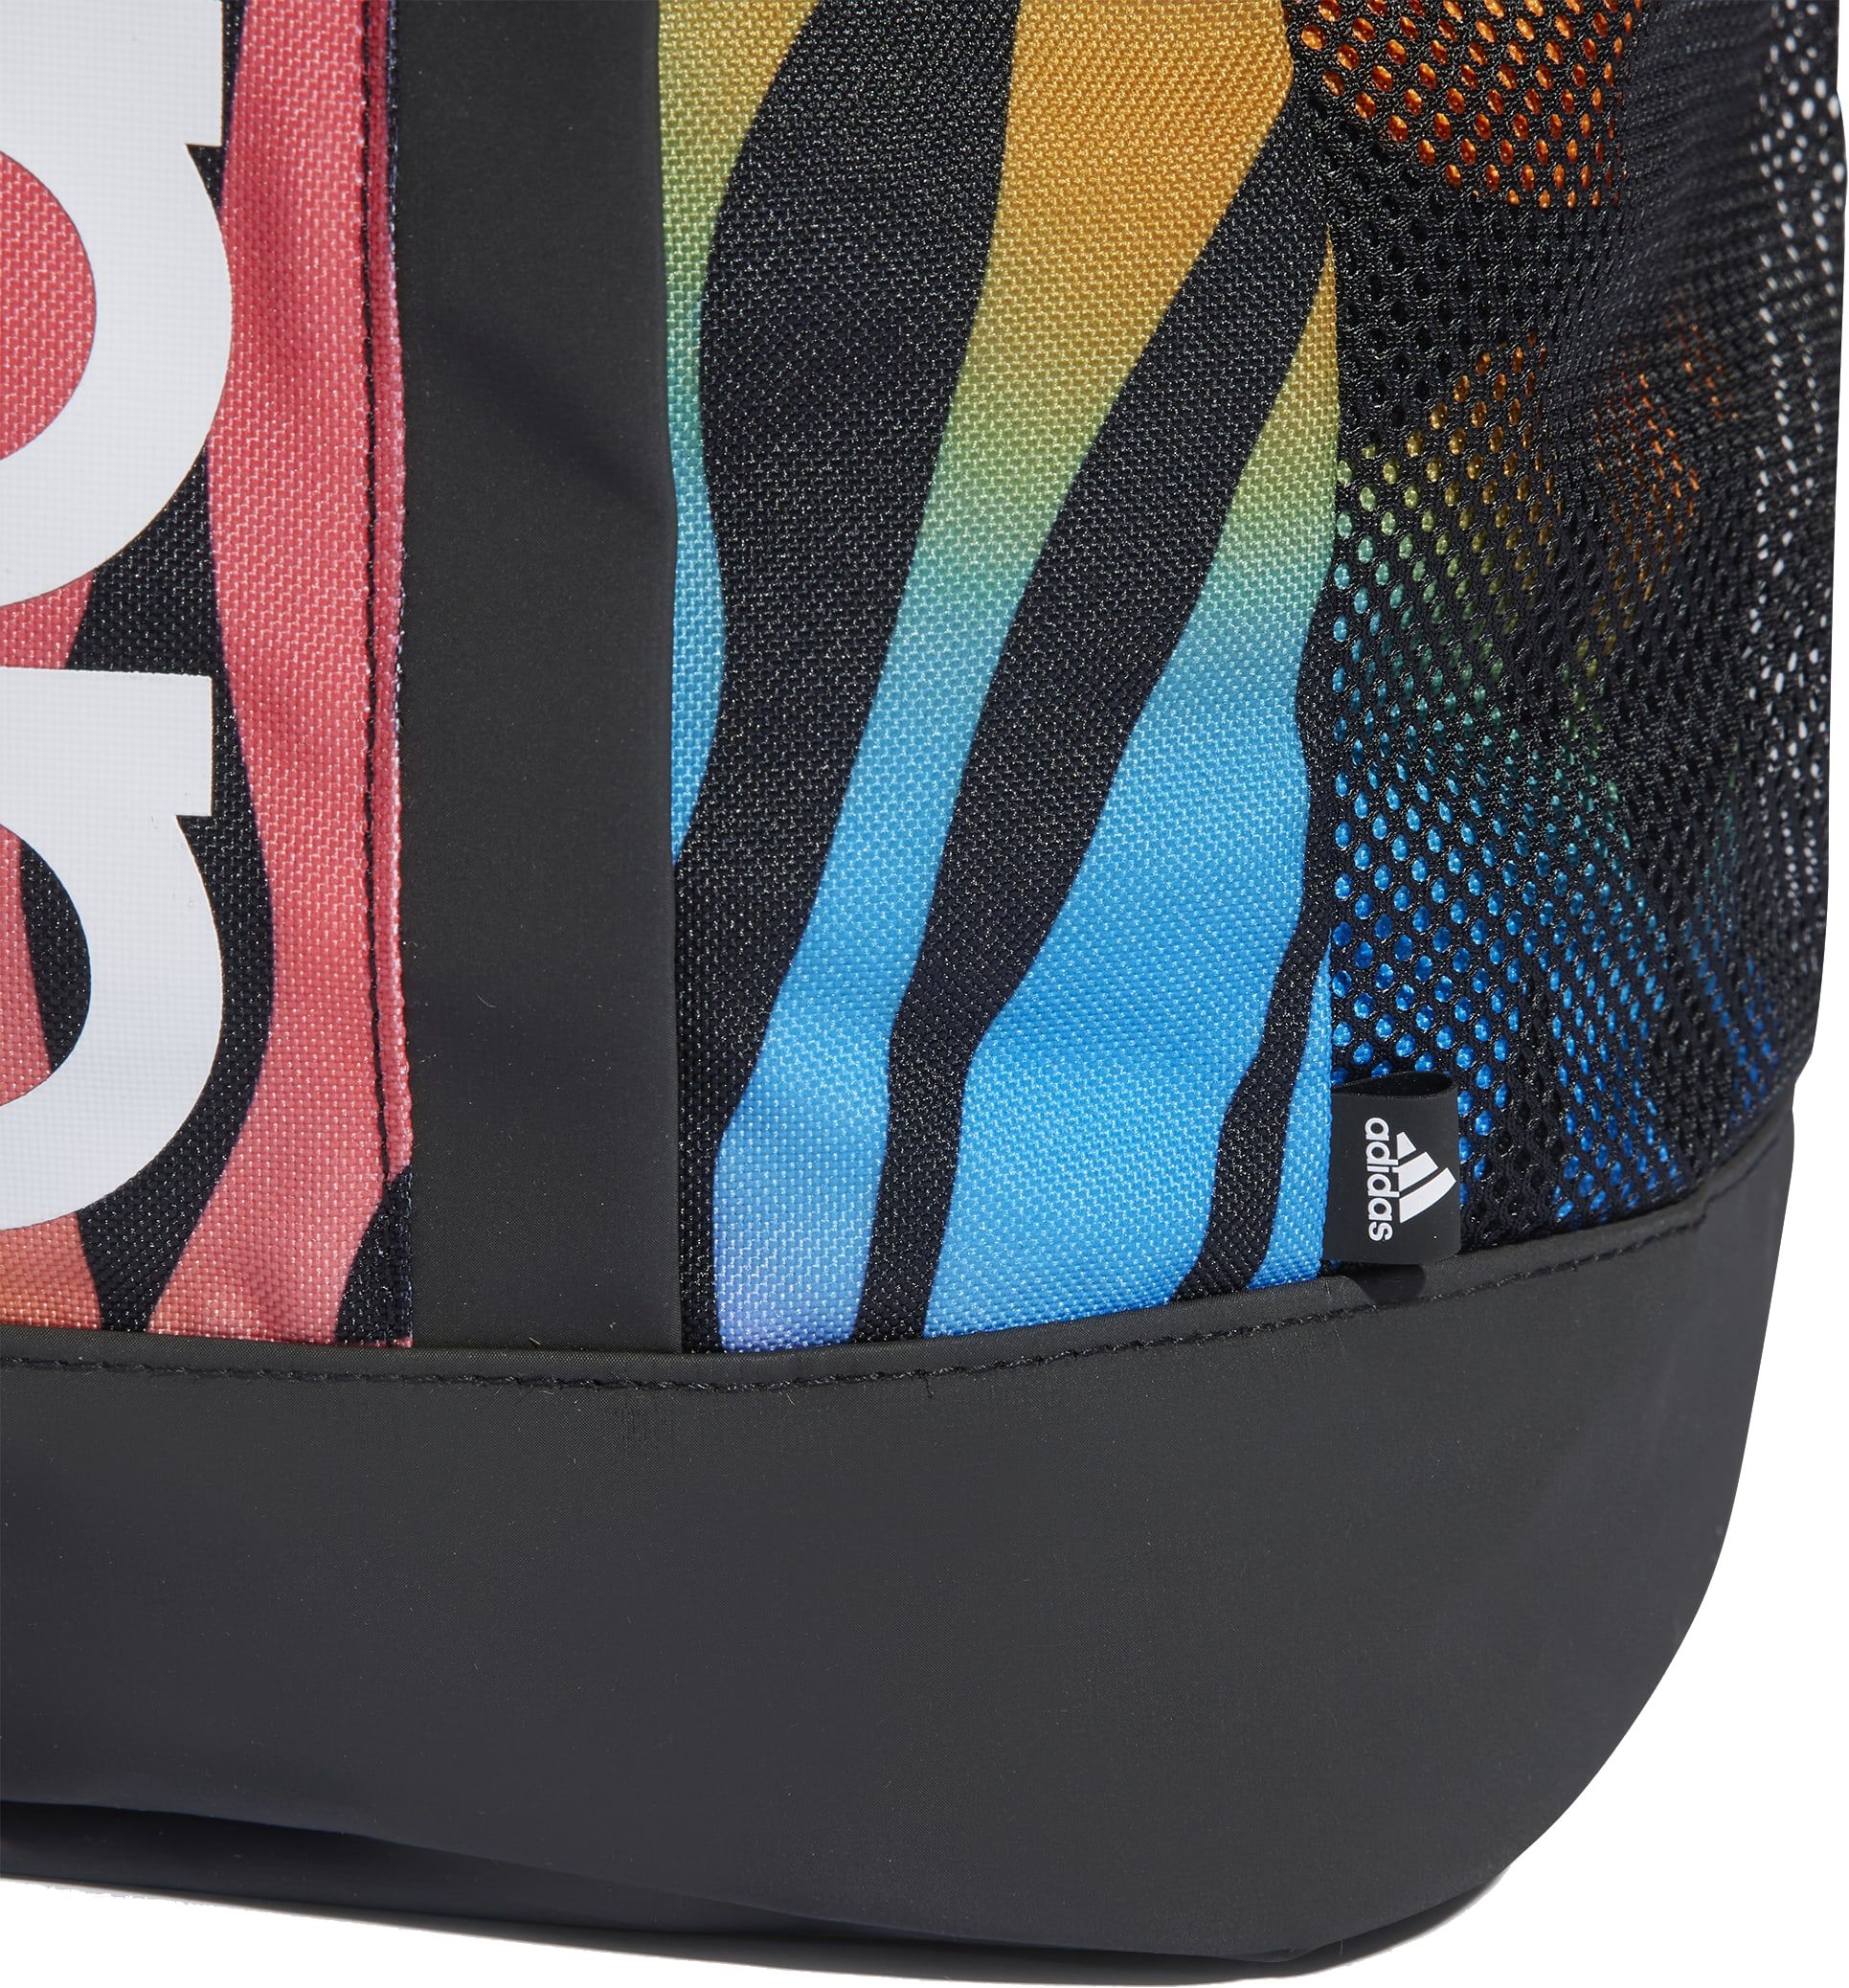 ADIDAS, Tailored For Her Graphic Backpack